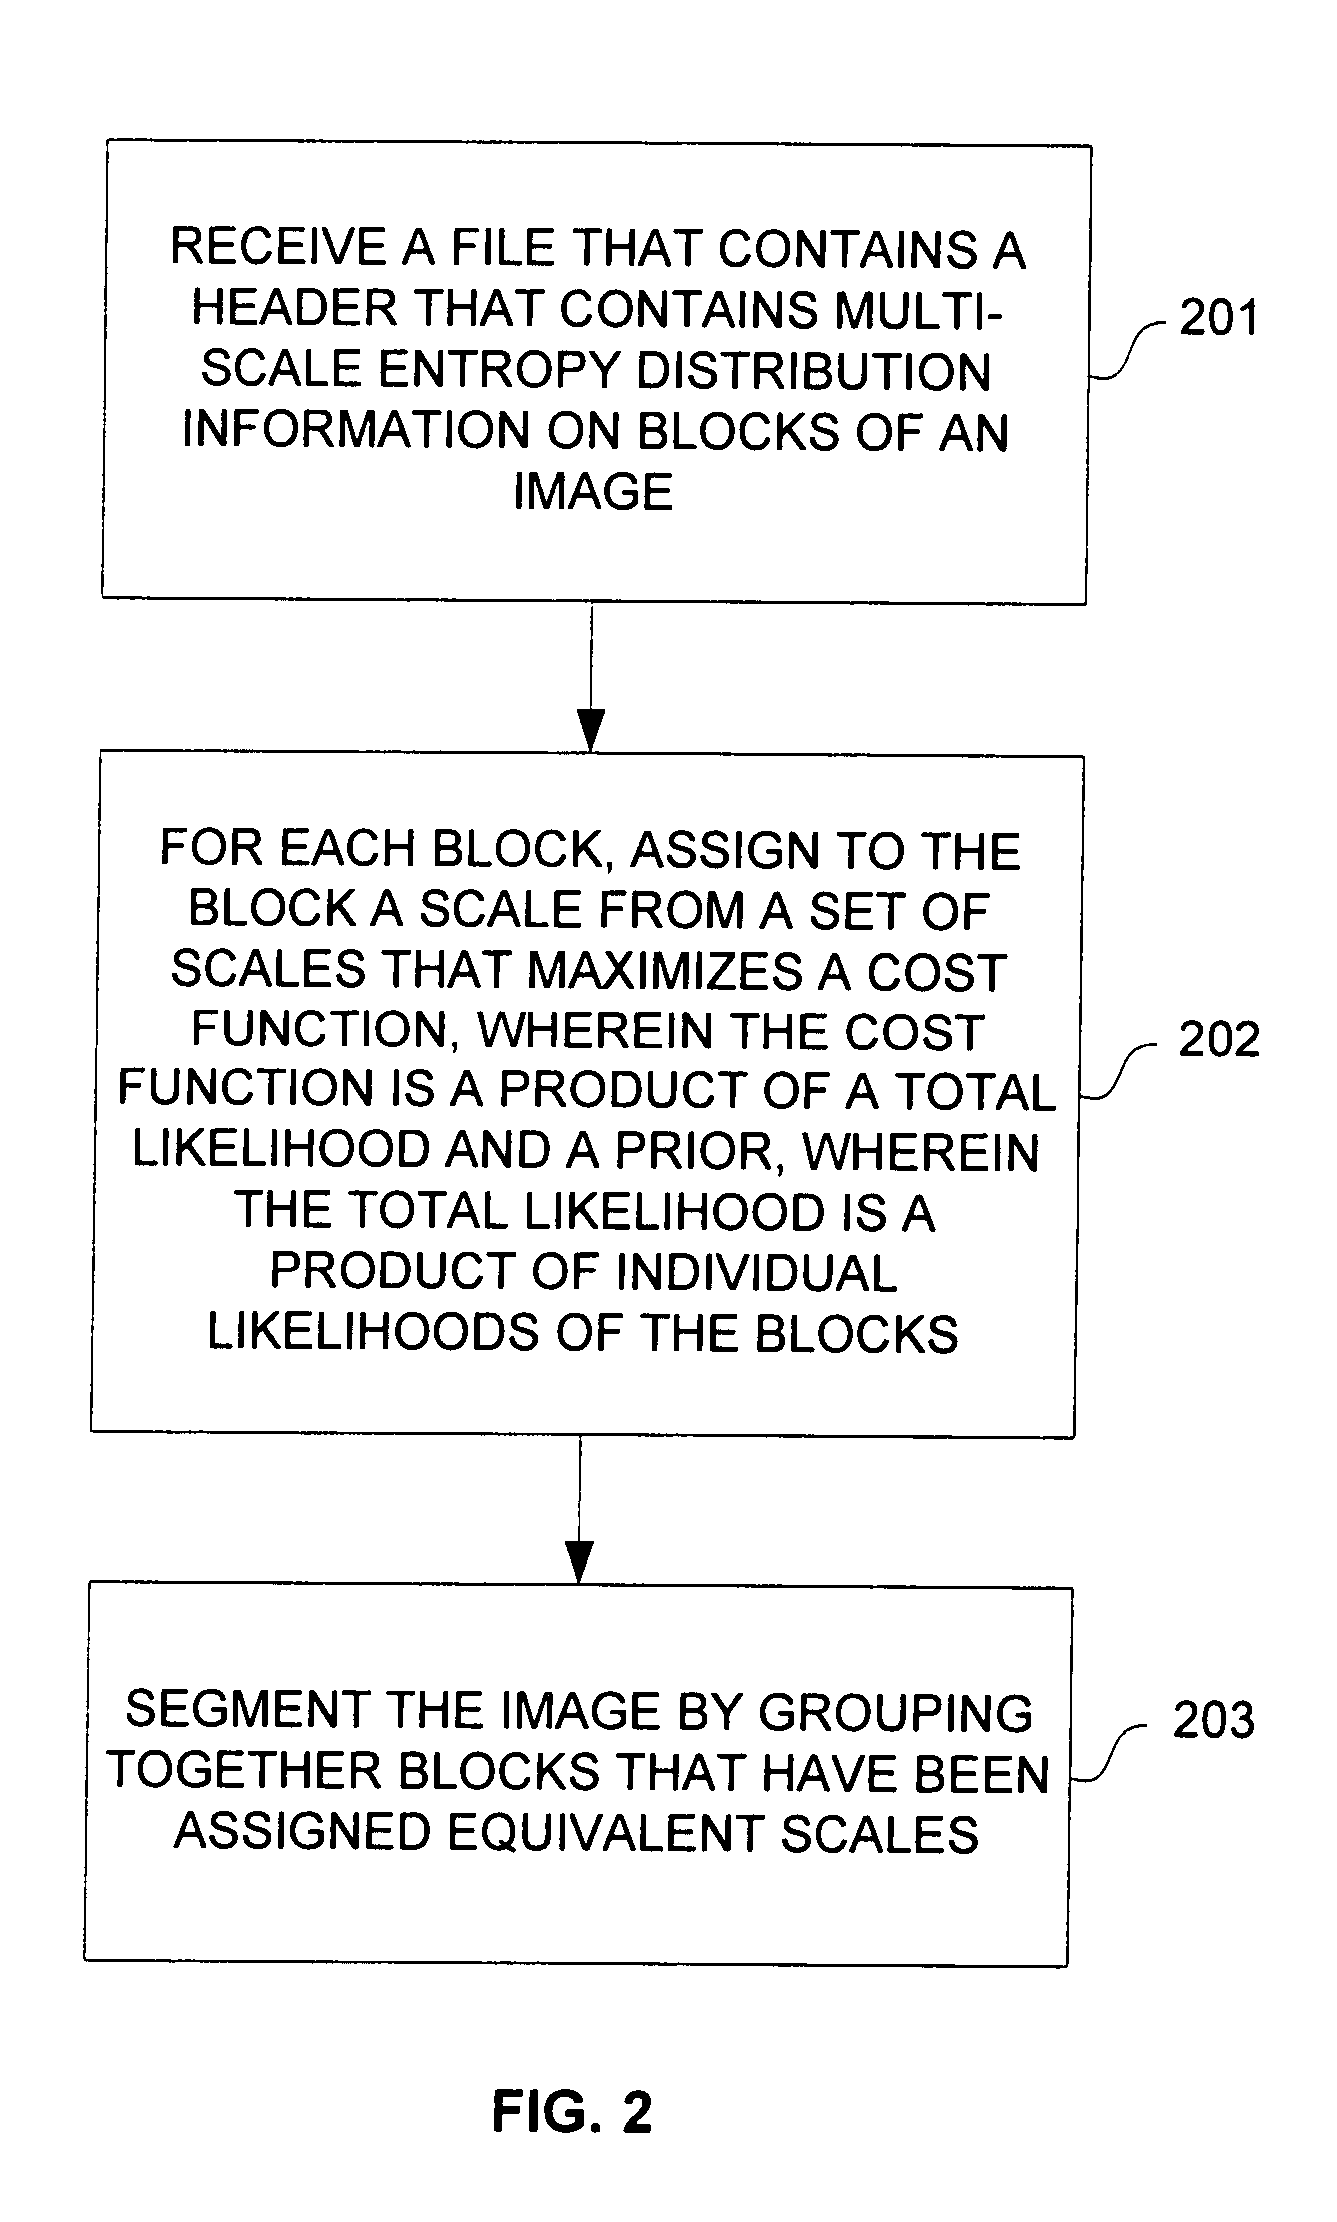 Header-based processing of image compressed using multi-scale transforms